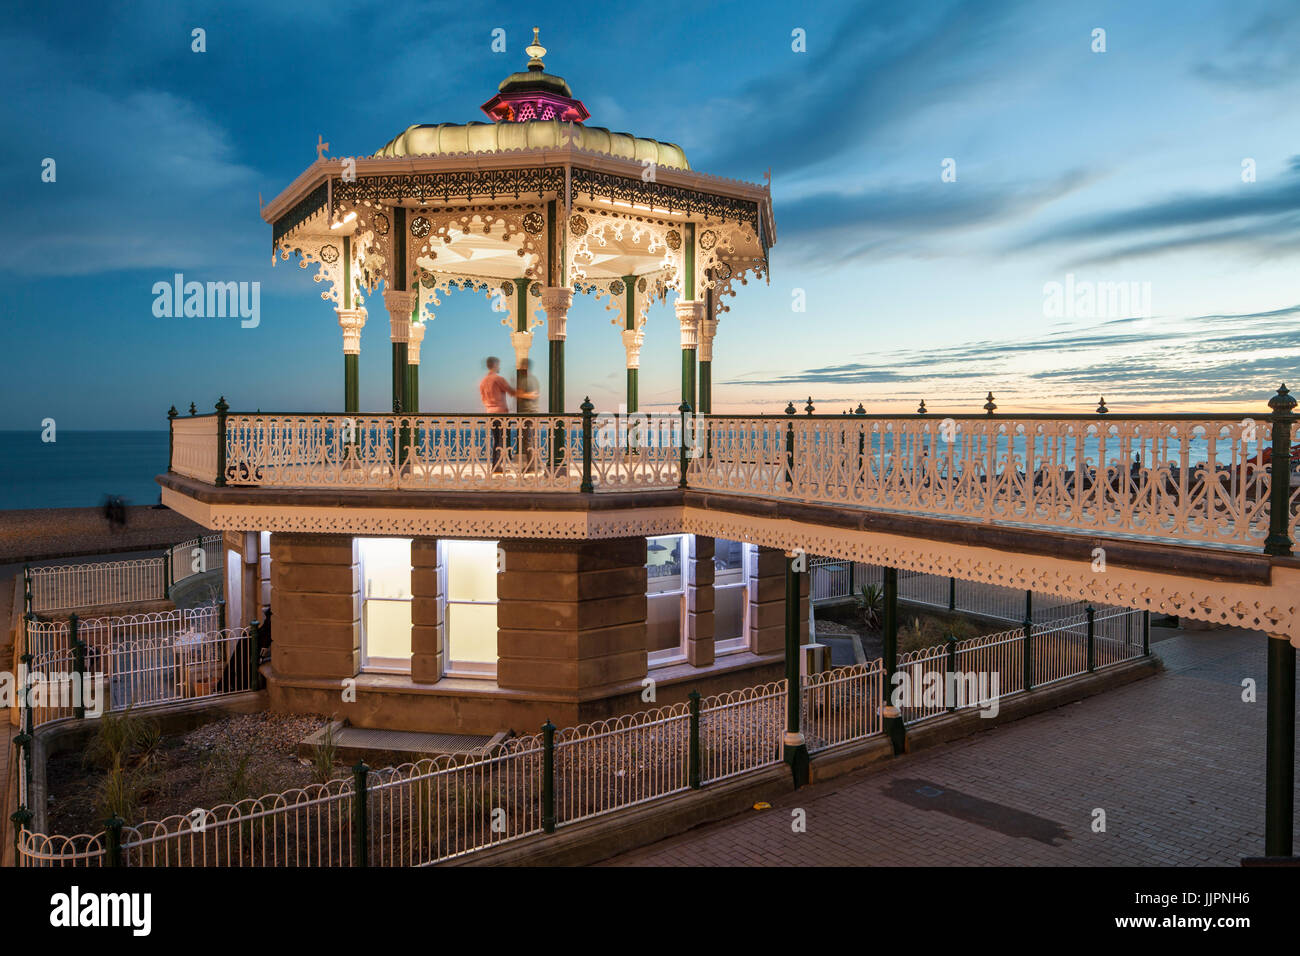 Late summer evening at Brighton Bandstand. Stock Photo